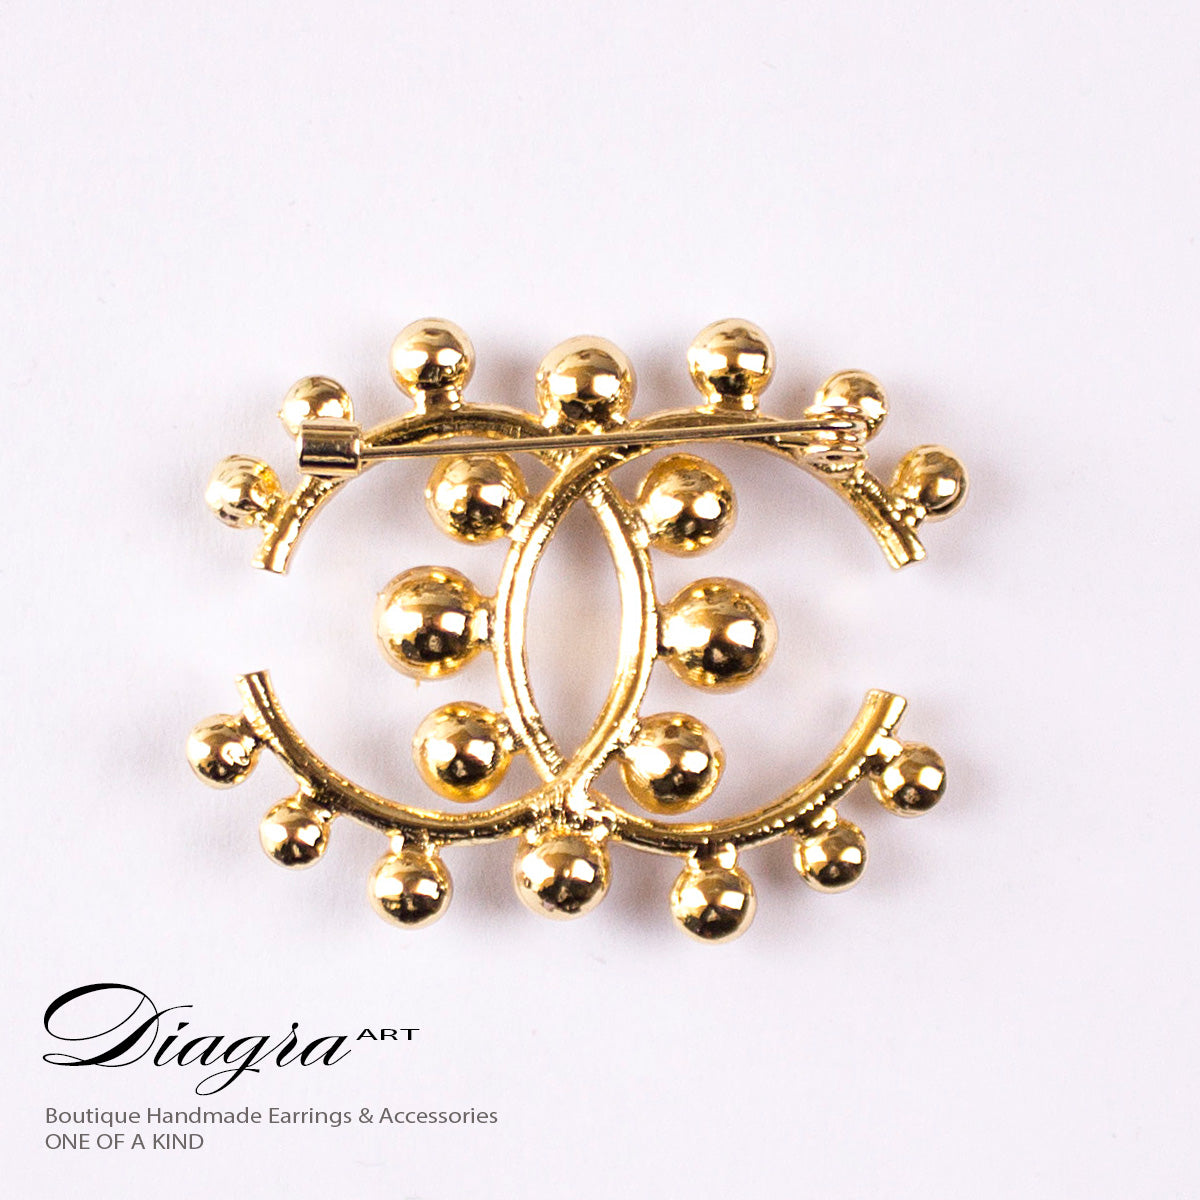 Chanel Gold Metal and Faux Pearl Snowflake Brooch - Yoogi's Closet